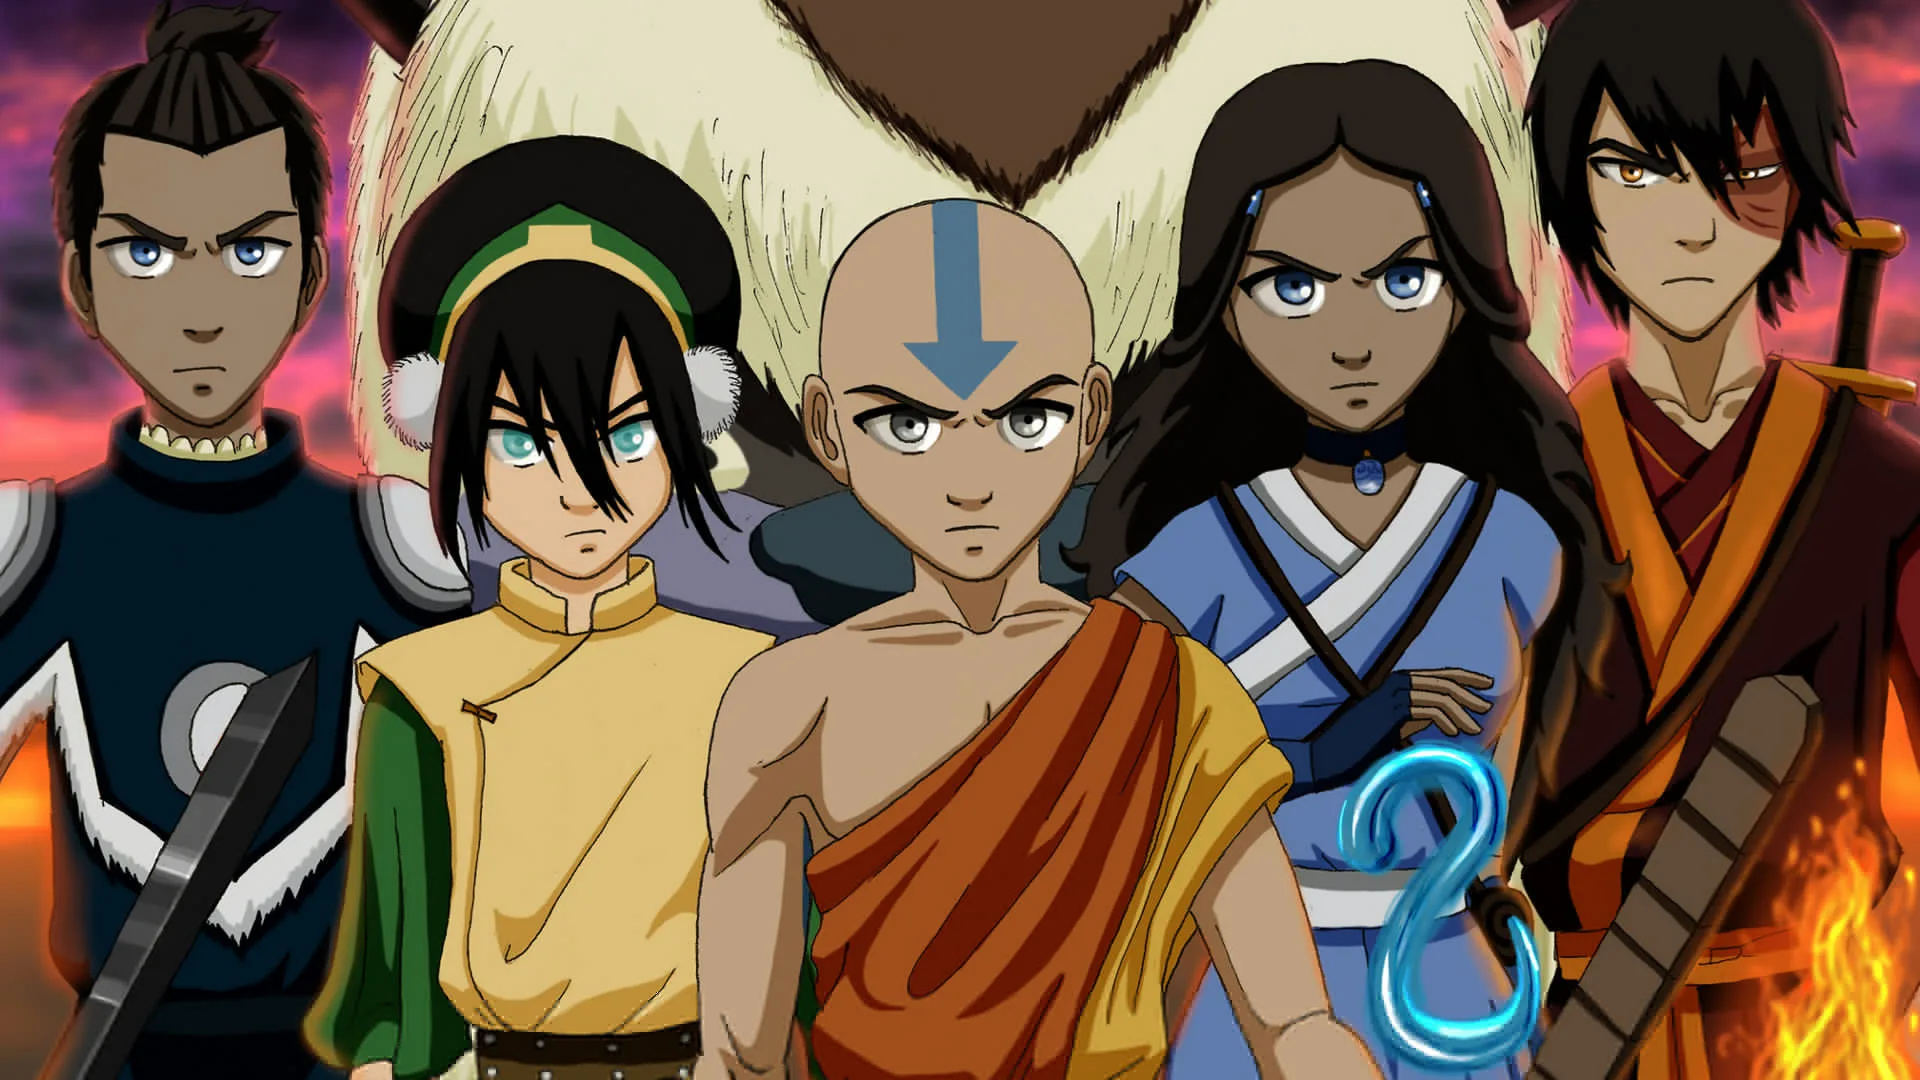  Image depicting characters from Netflix's live-action adaptation of Avatar: The Last Airbender.